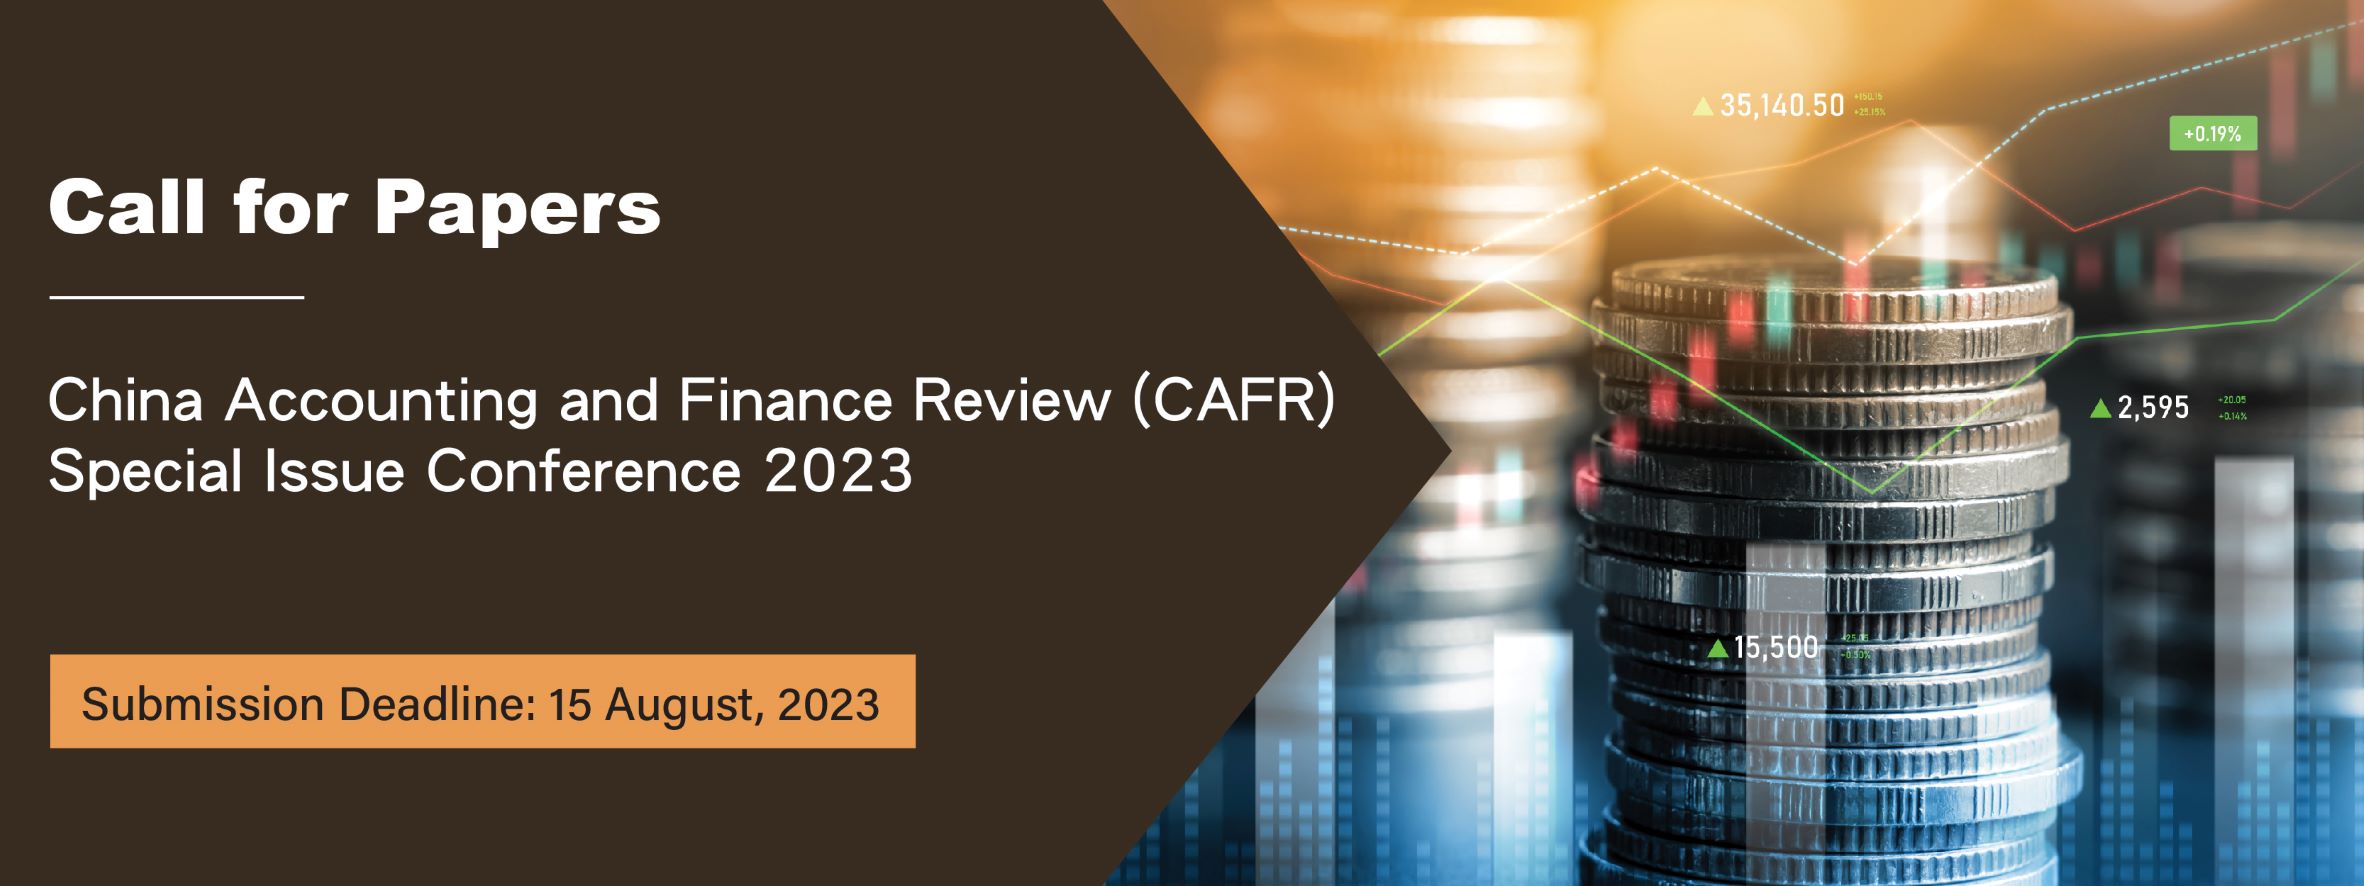 CAFR Special Issue Conference 2023